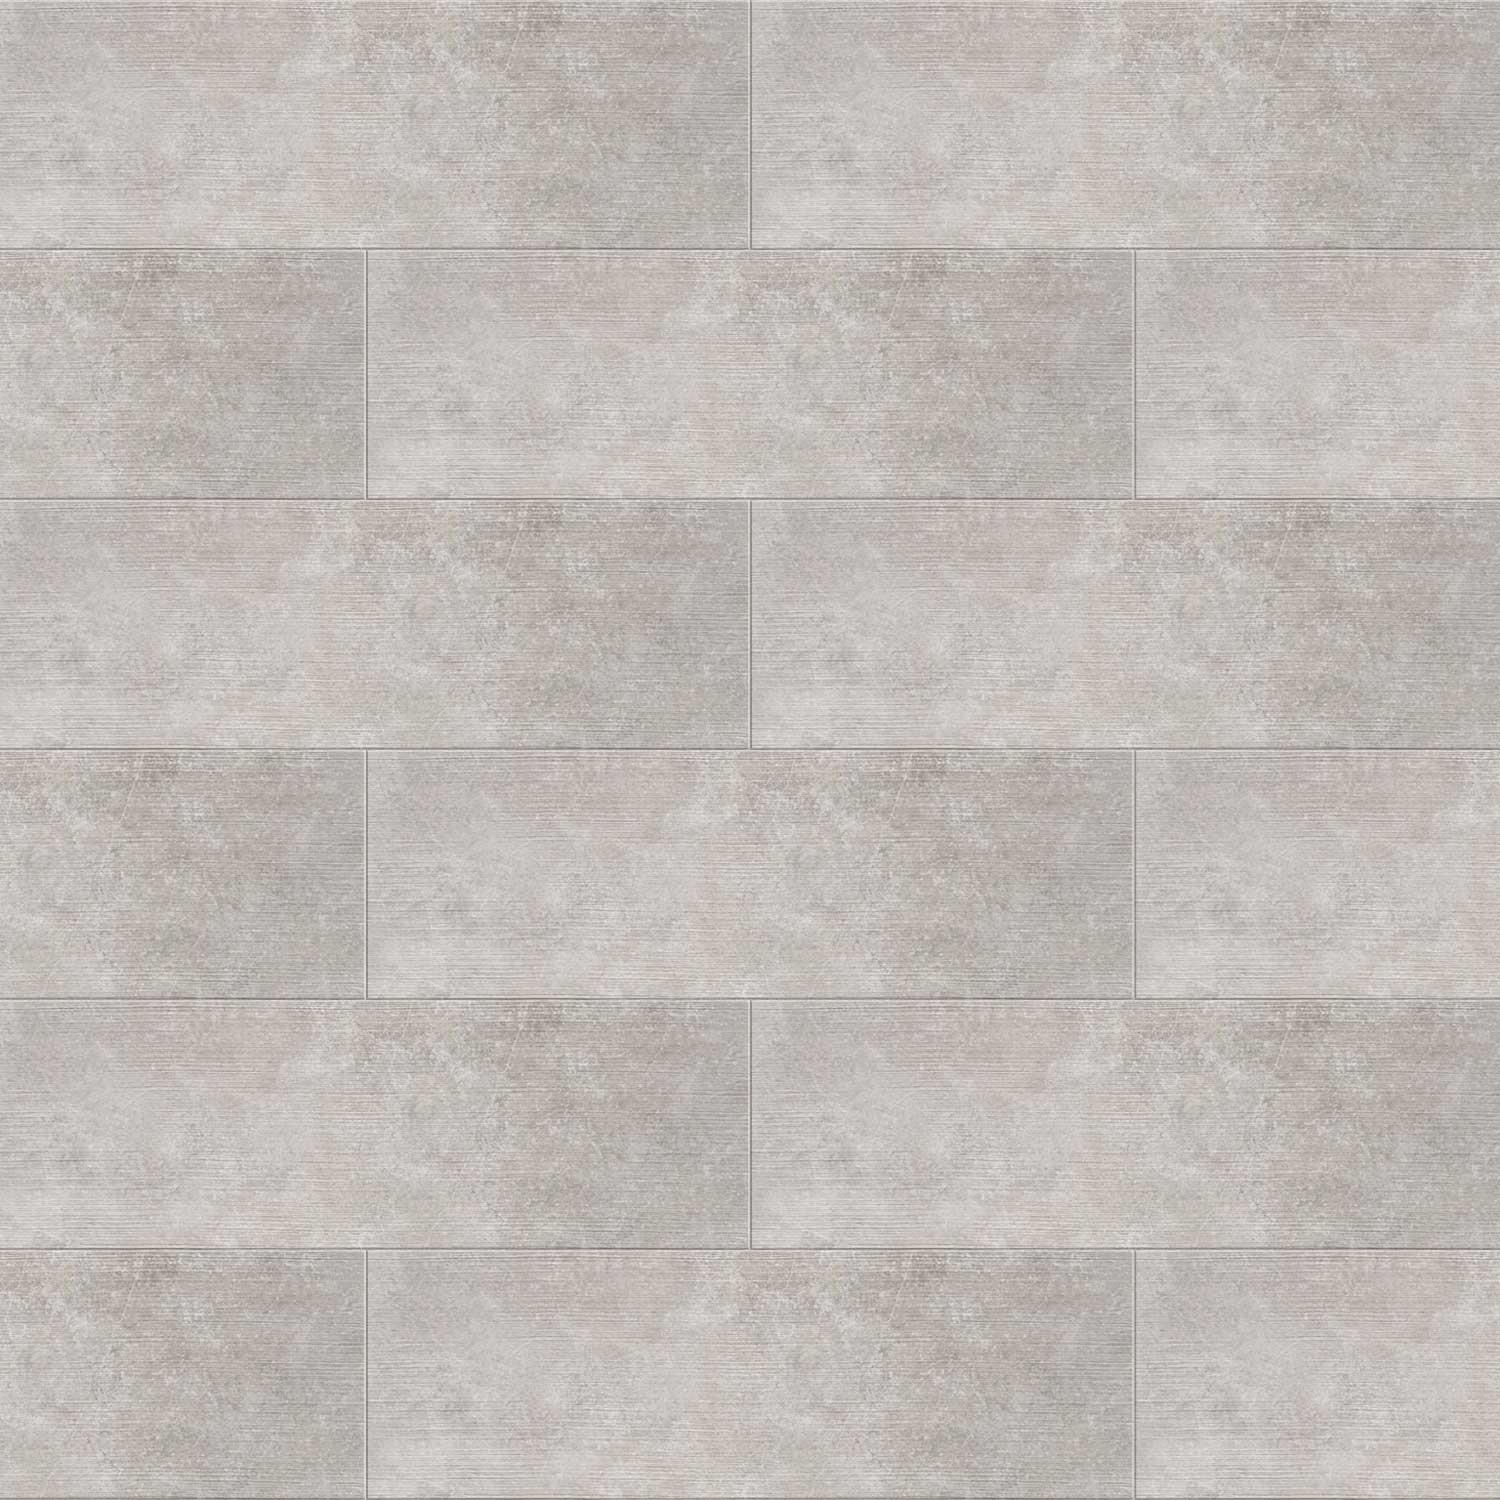 Majestic Decor Pearl Ceramic Tile Indoor Wall 290 x 890mm